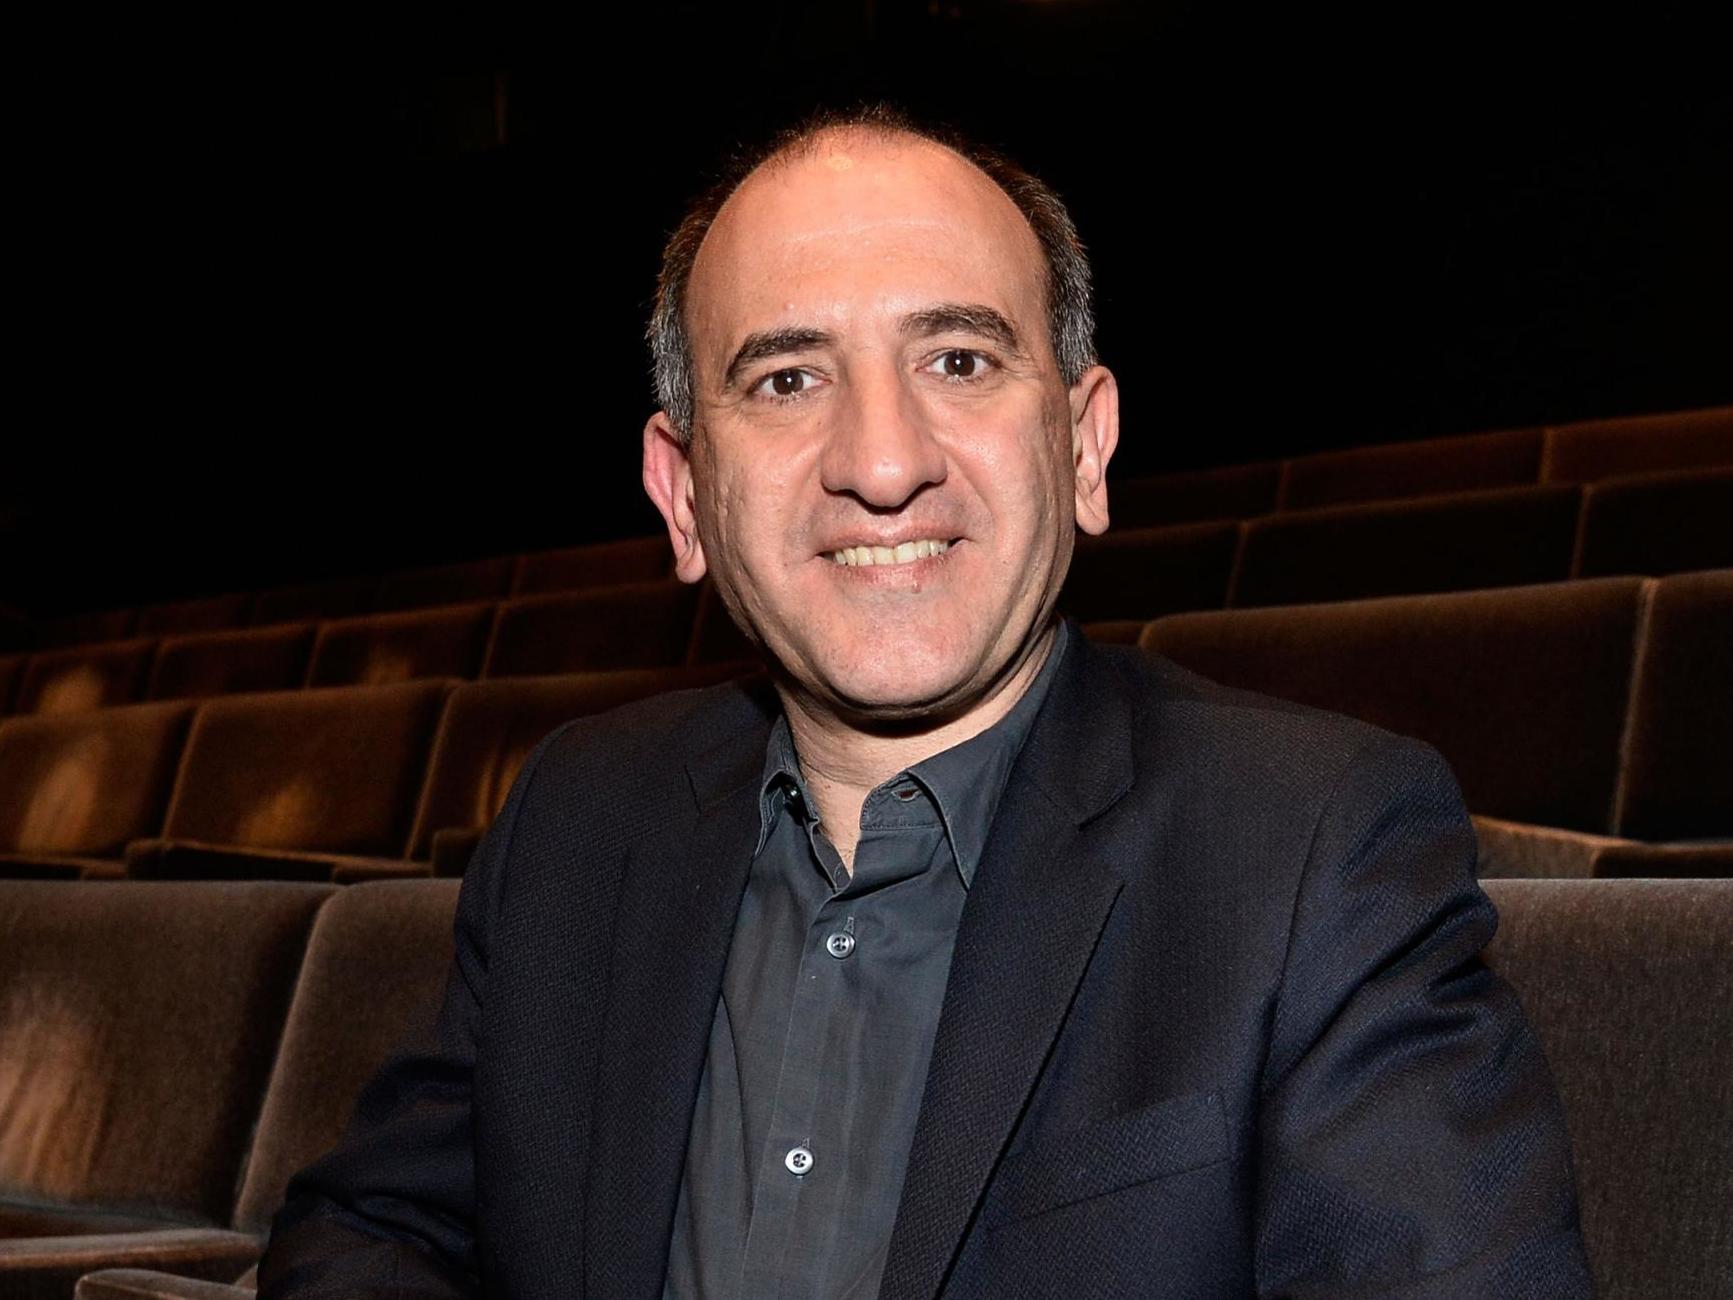 Armando Iannucci wanted the show to be the ‘funniest thing on TV’